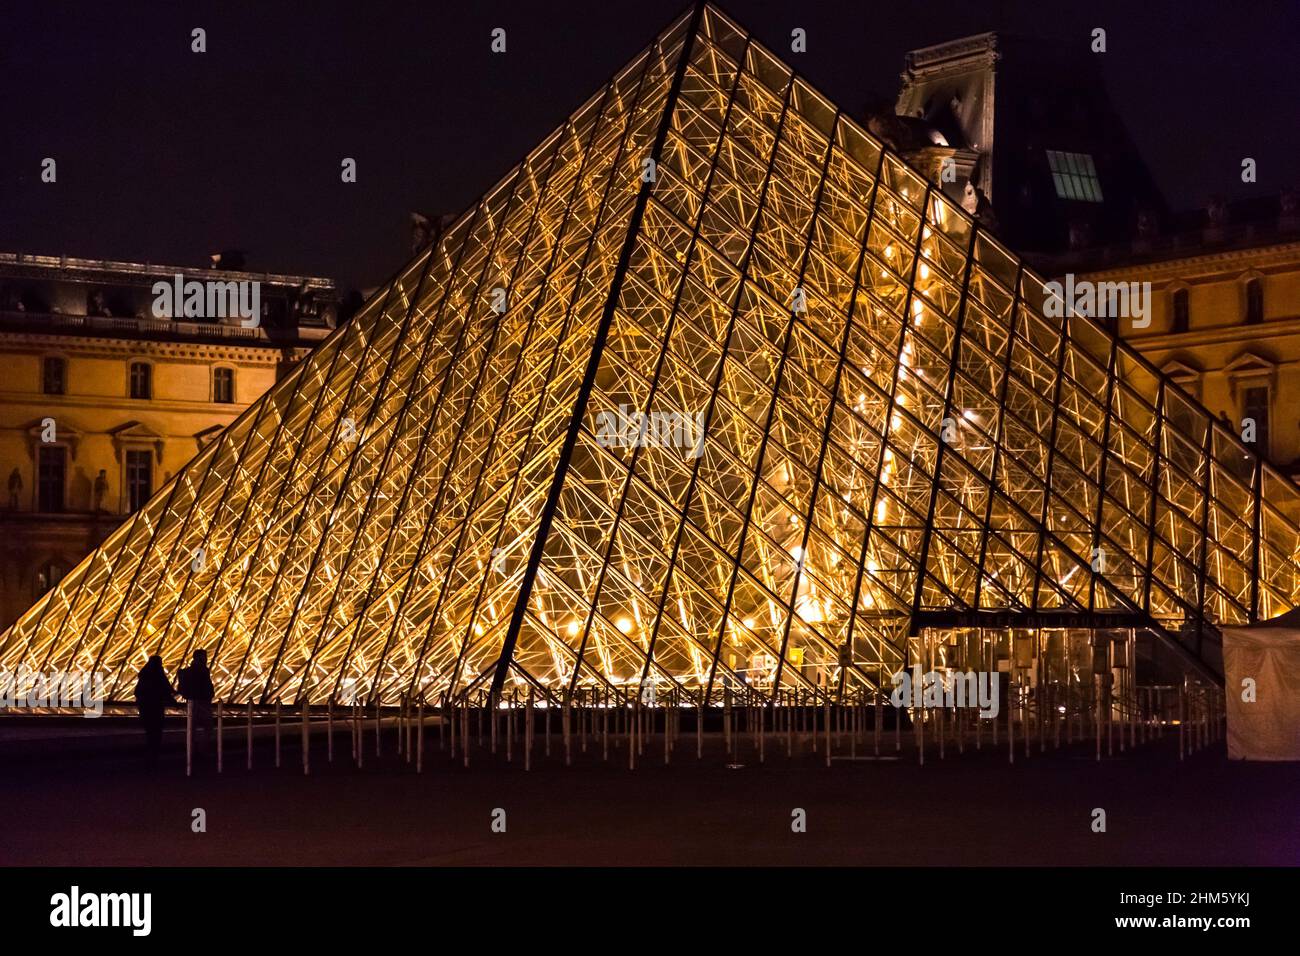 Paris, France - JAN 24, 2022: The glass pyramid of Louvre Museum, the main entrance to famous museum and gallery, completed in 1989. A beautiful winte Stock Photo